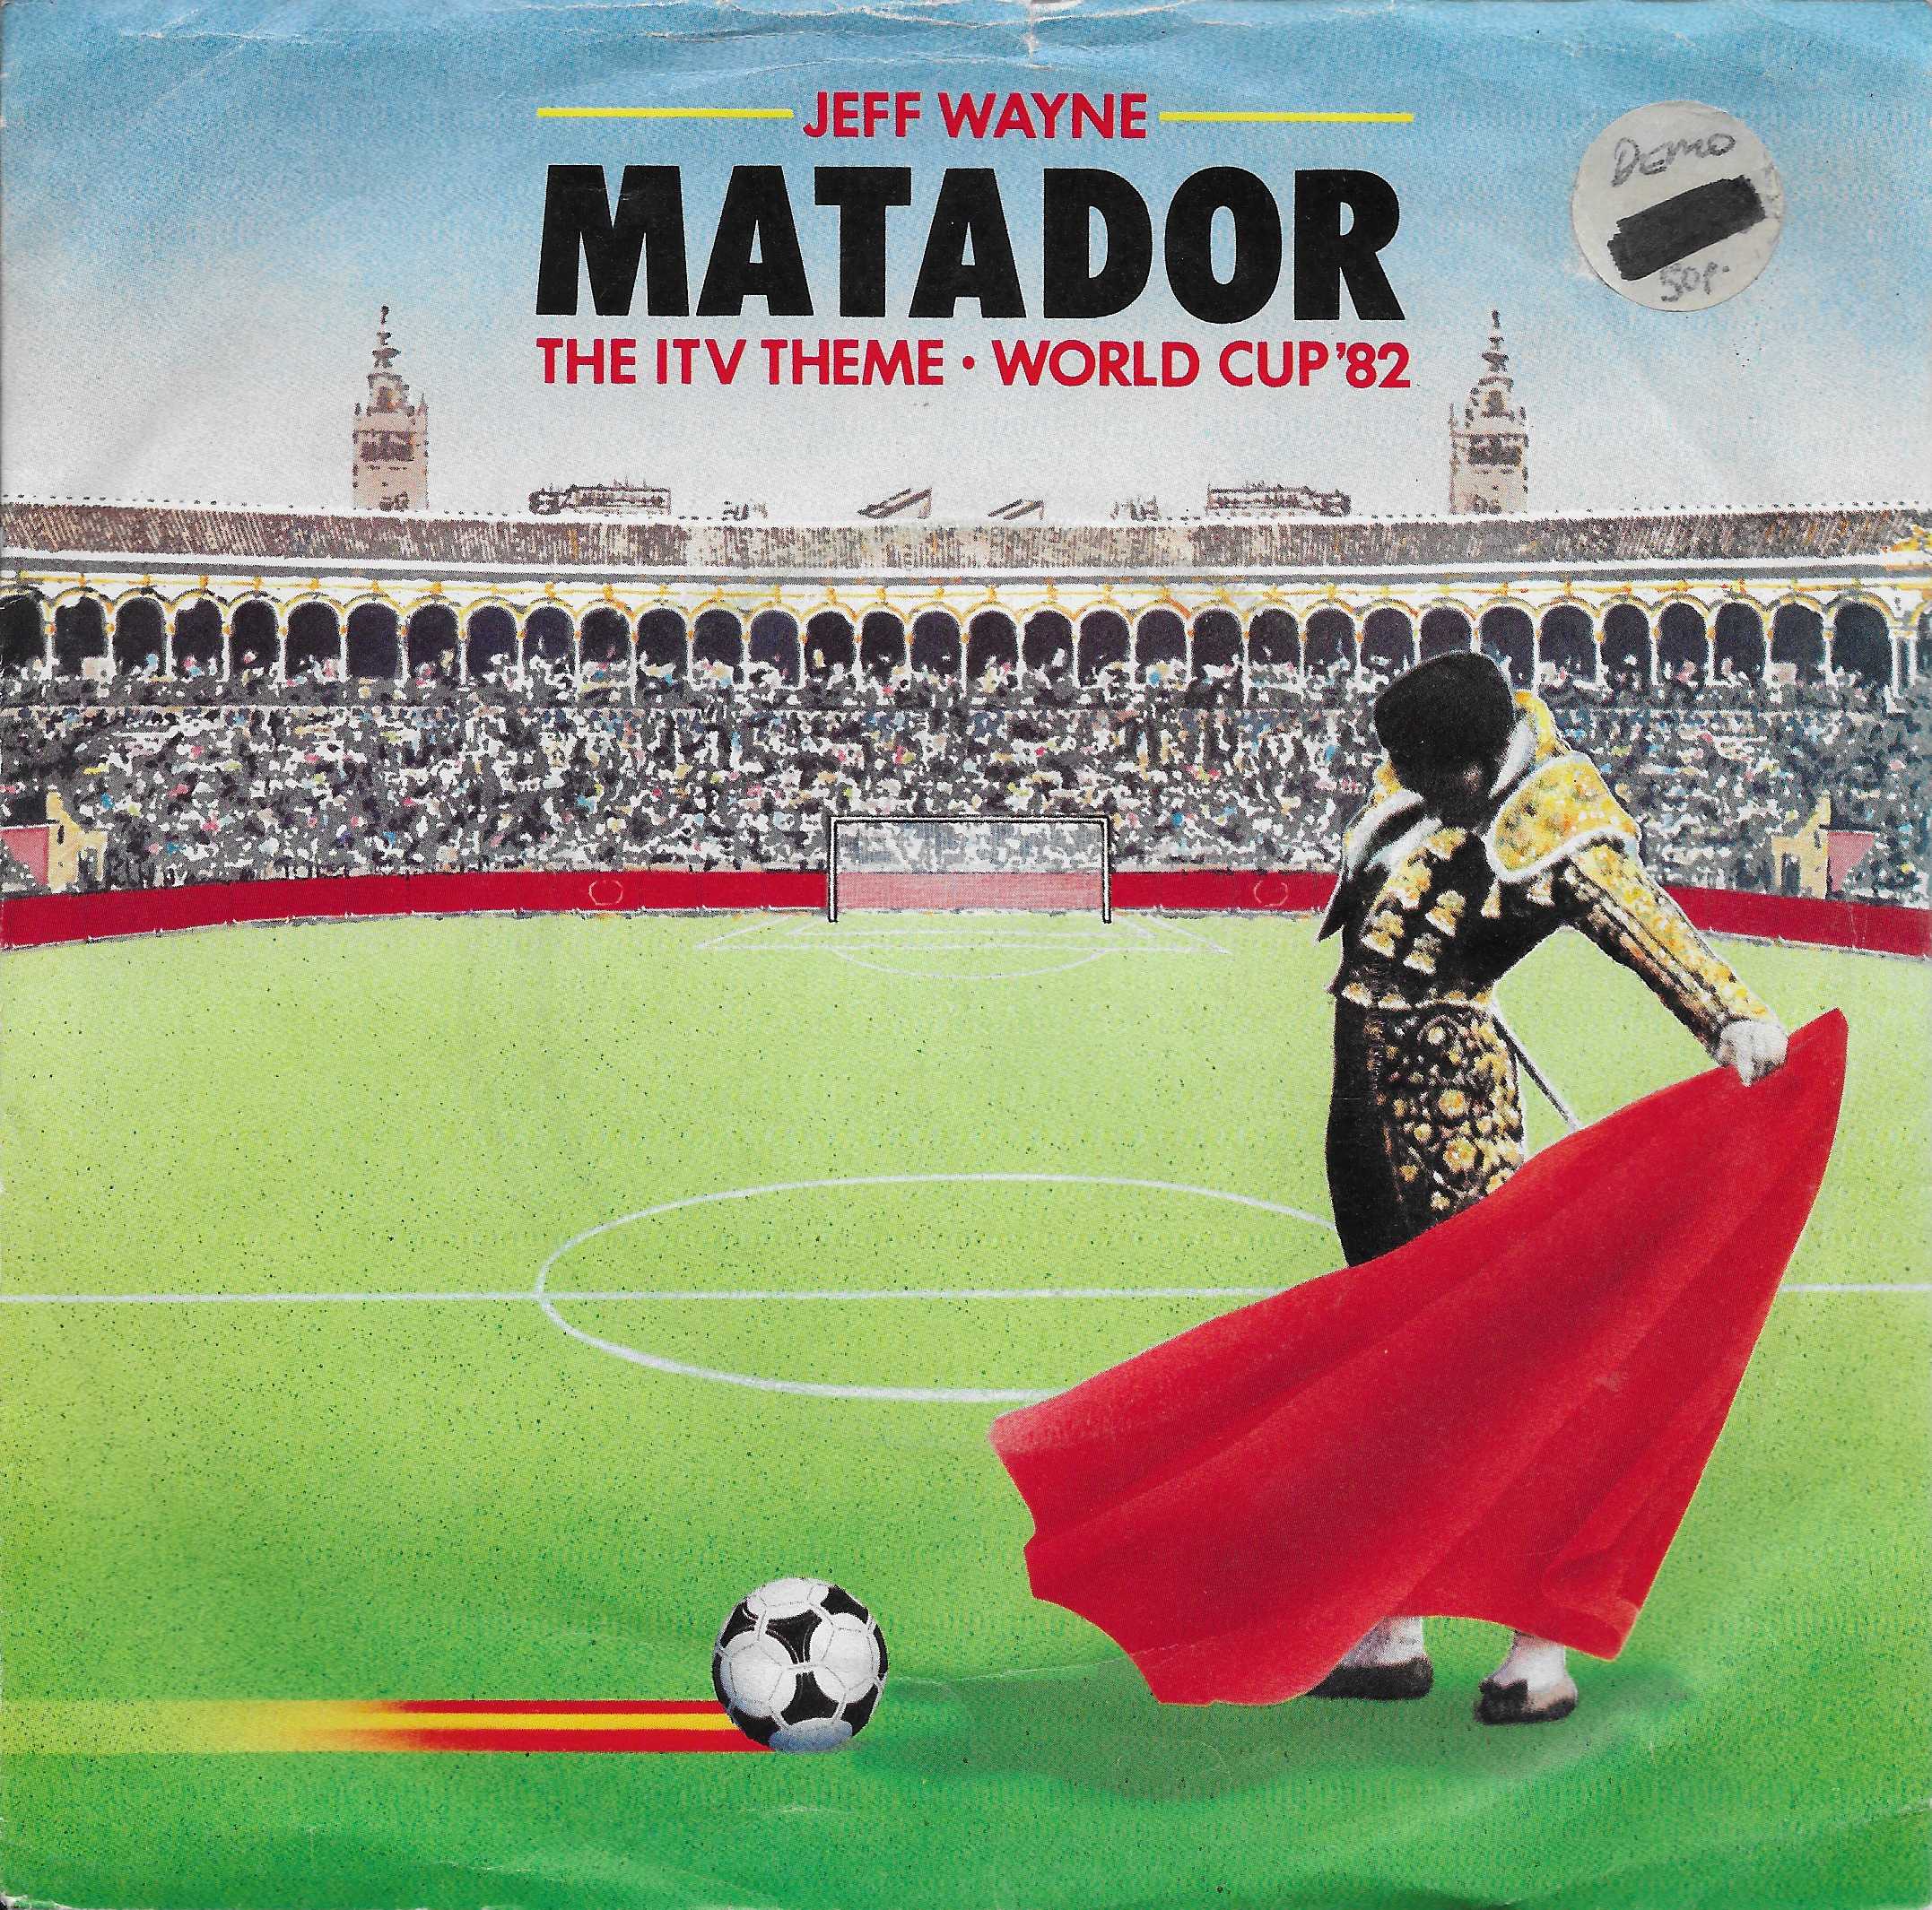 Picture of A 2493 P Matador (ITV World Cup theme (1982)) - Promotional record by artist Jeff Wayne from ITV, Channel 4 and Channel 5 singles library